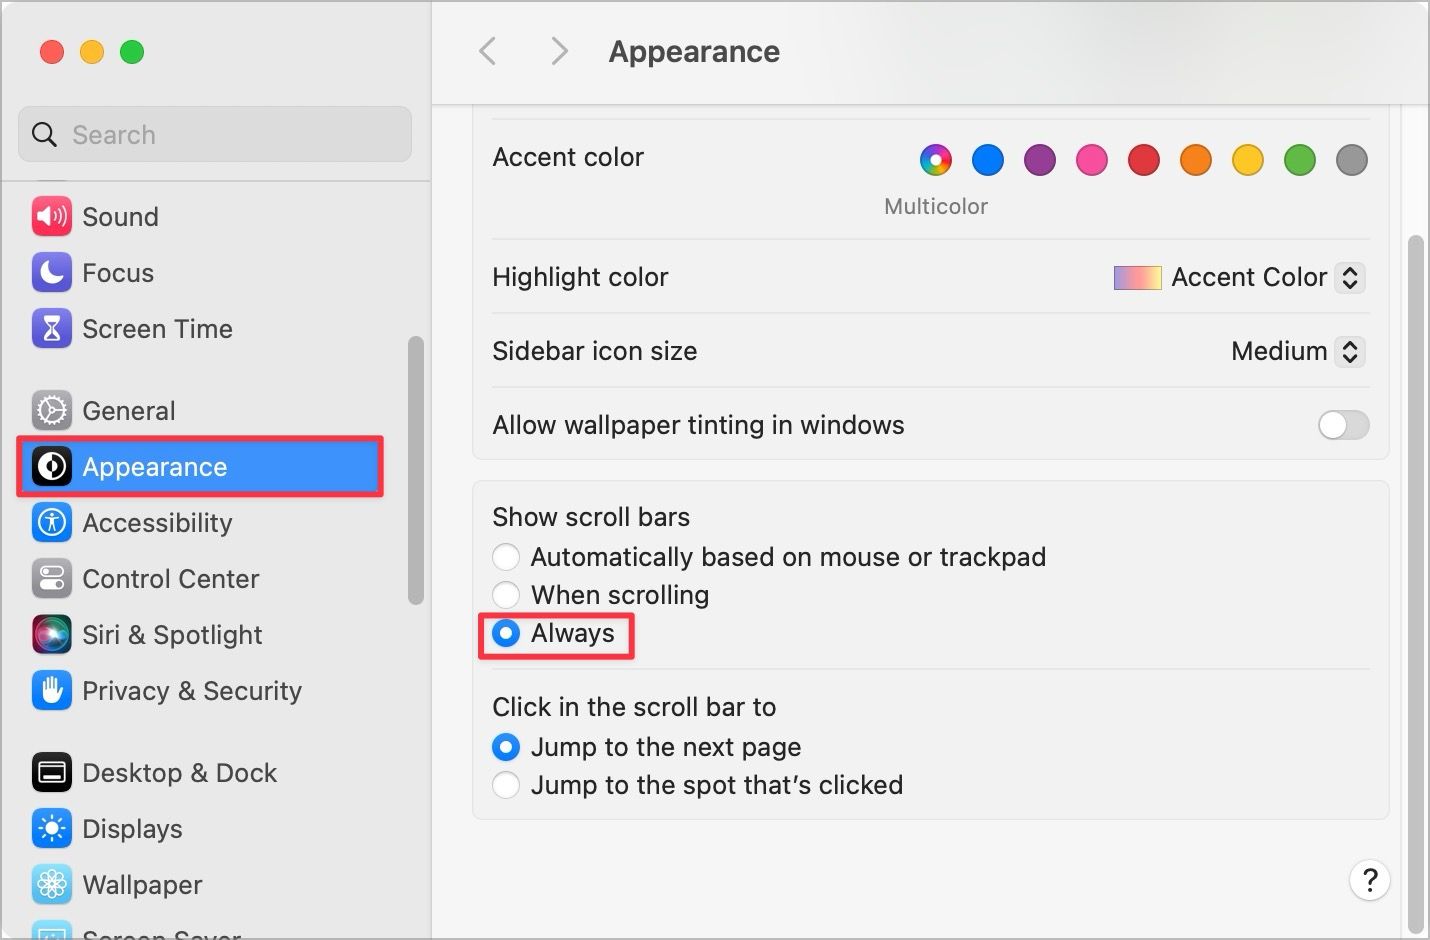 appearance settings page screenshot in macOS